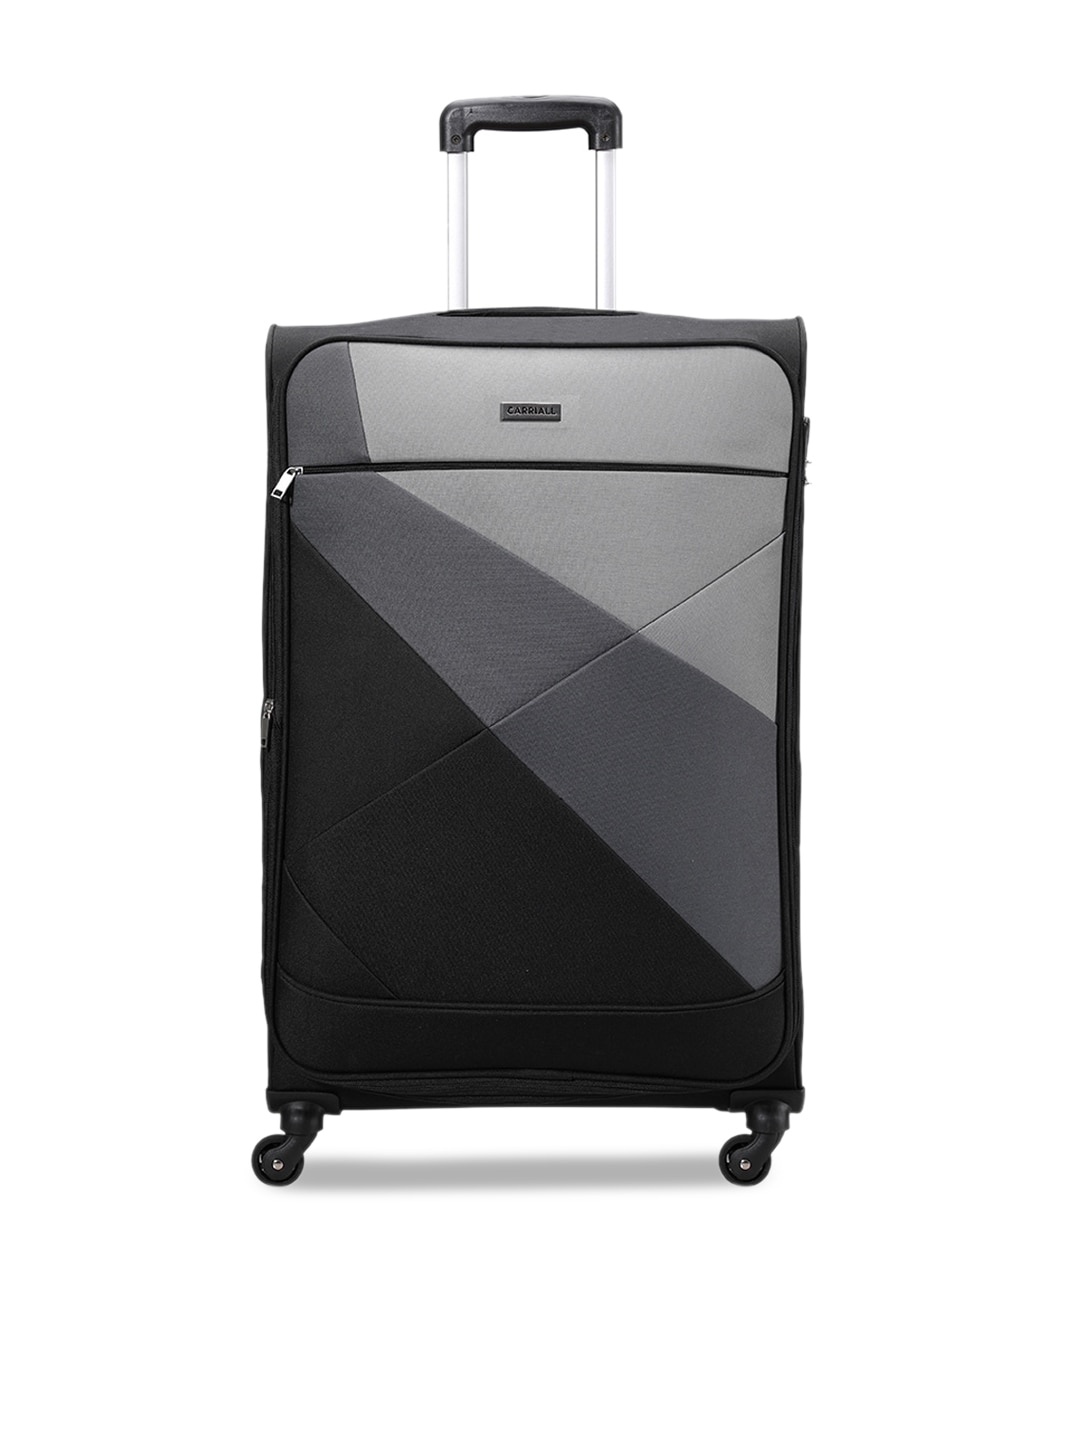 CARRIALL Black & Grey Colourblocked Soft-Sided Large Trolley Suitcase Price in India